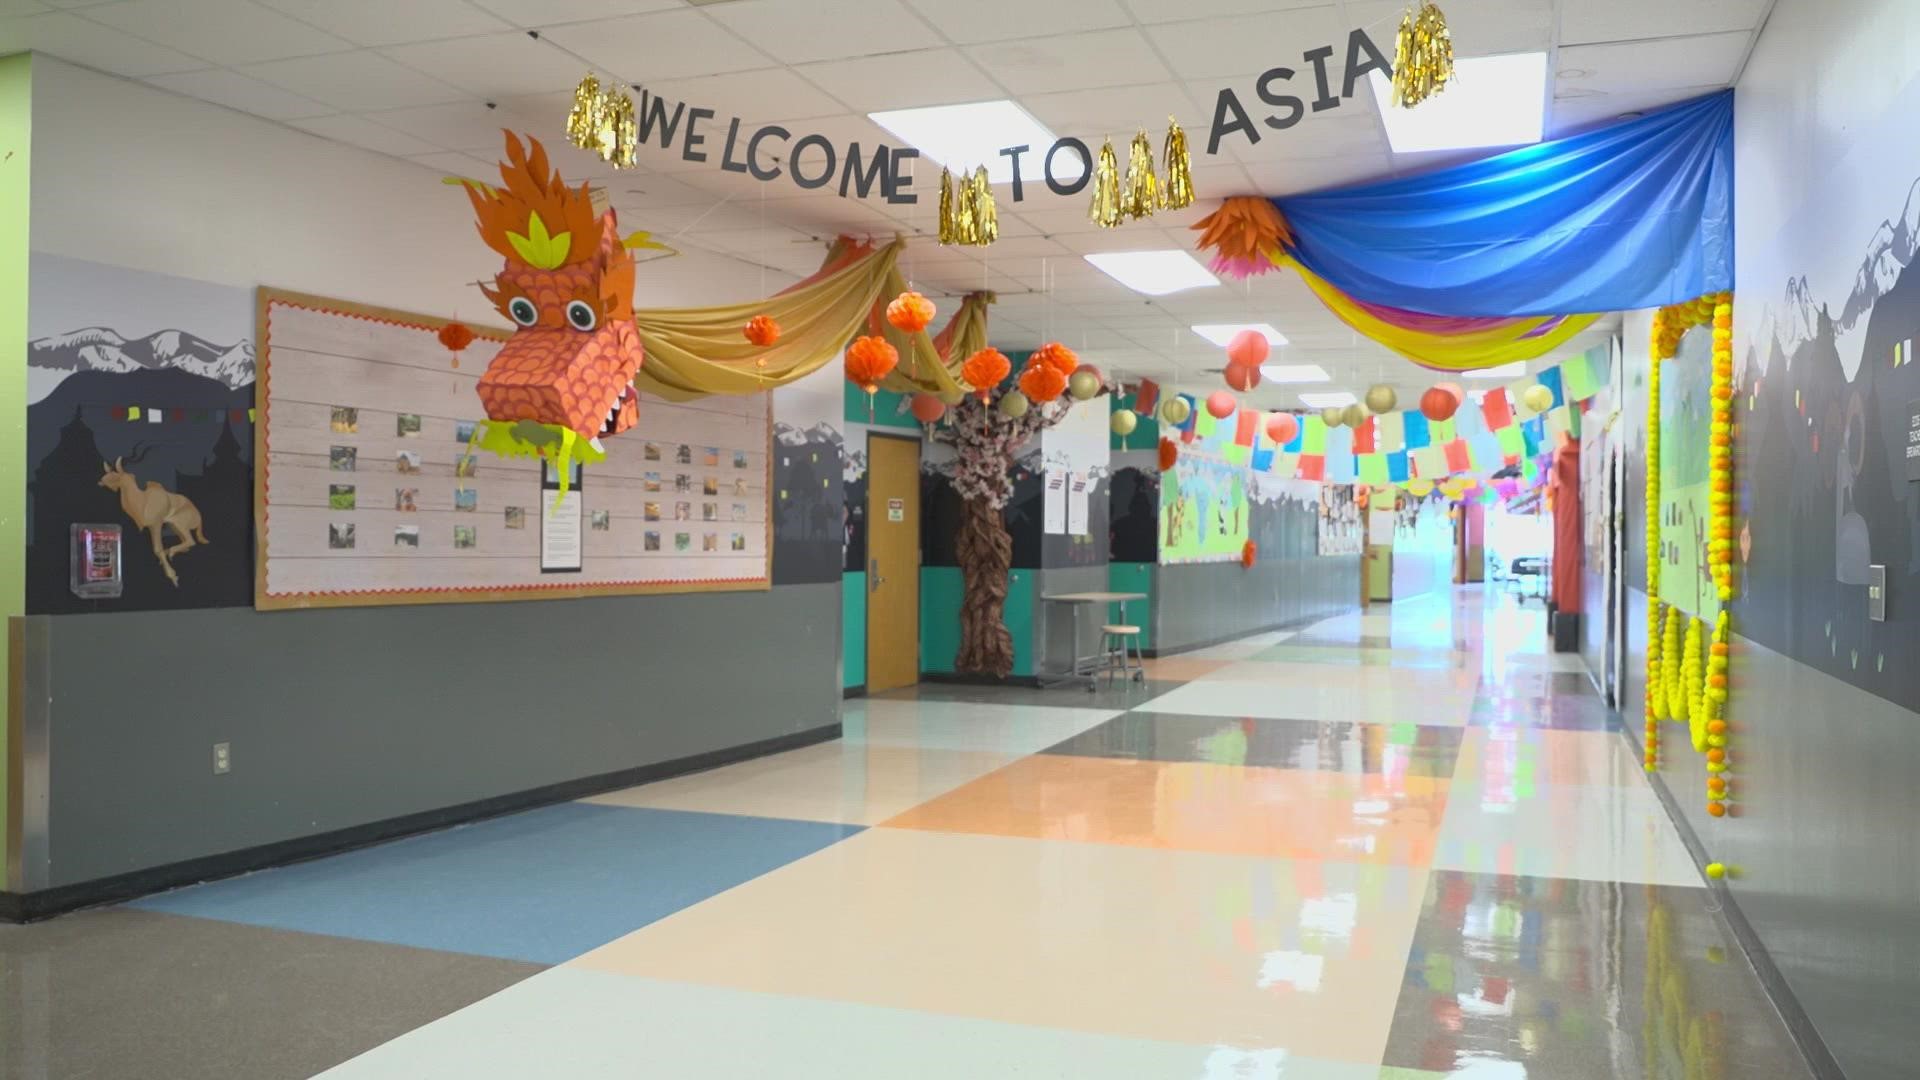 Teachers at one North Texas school are making classrooms feel like a global getaway.